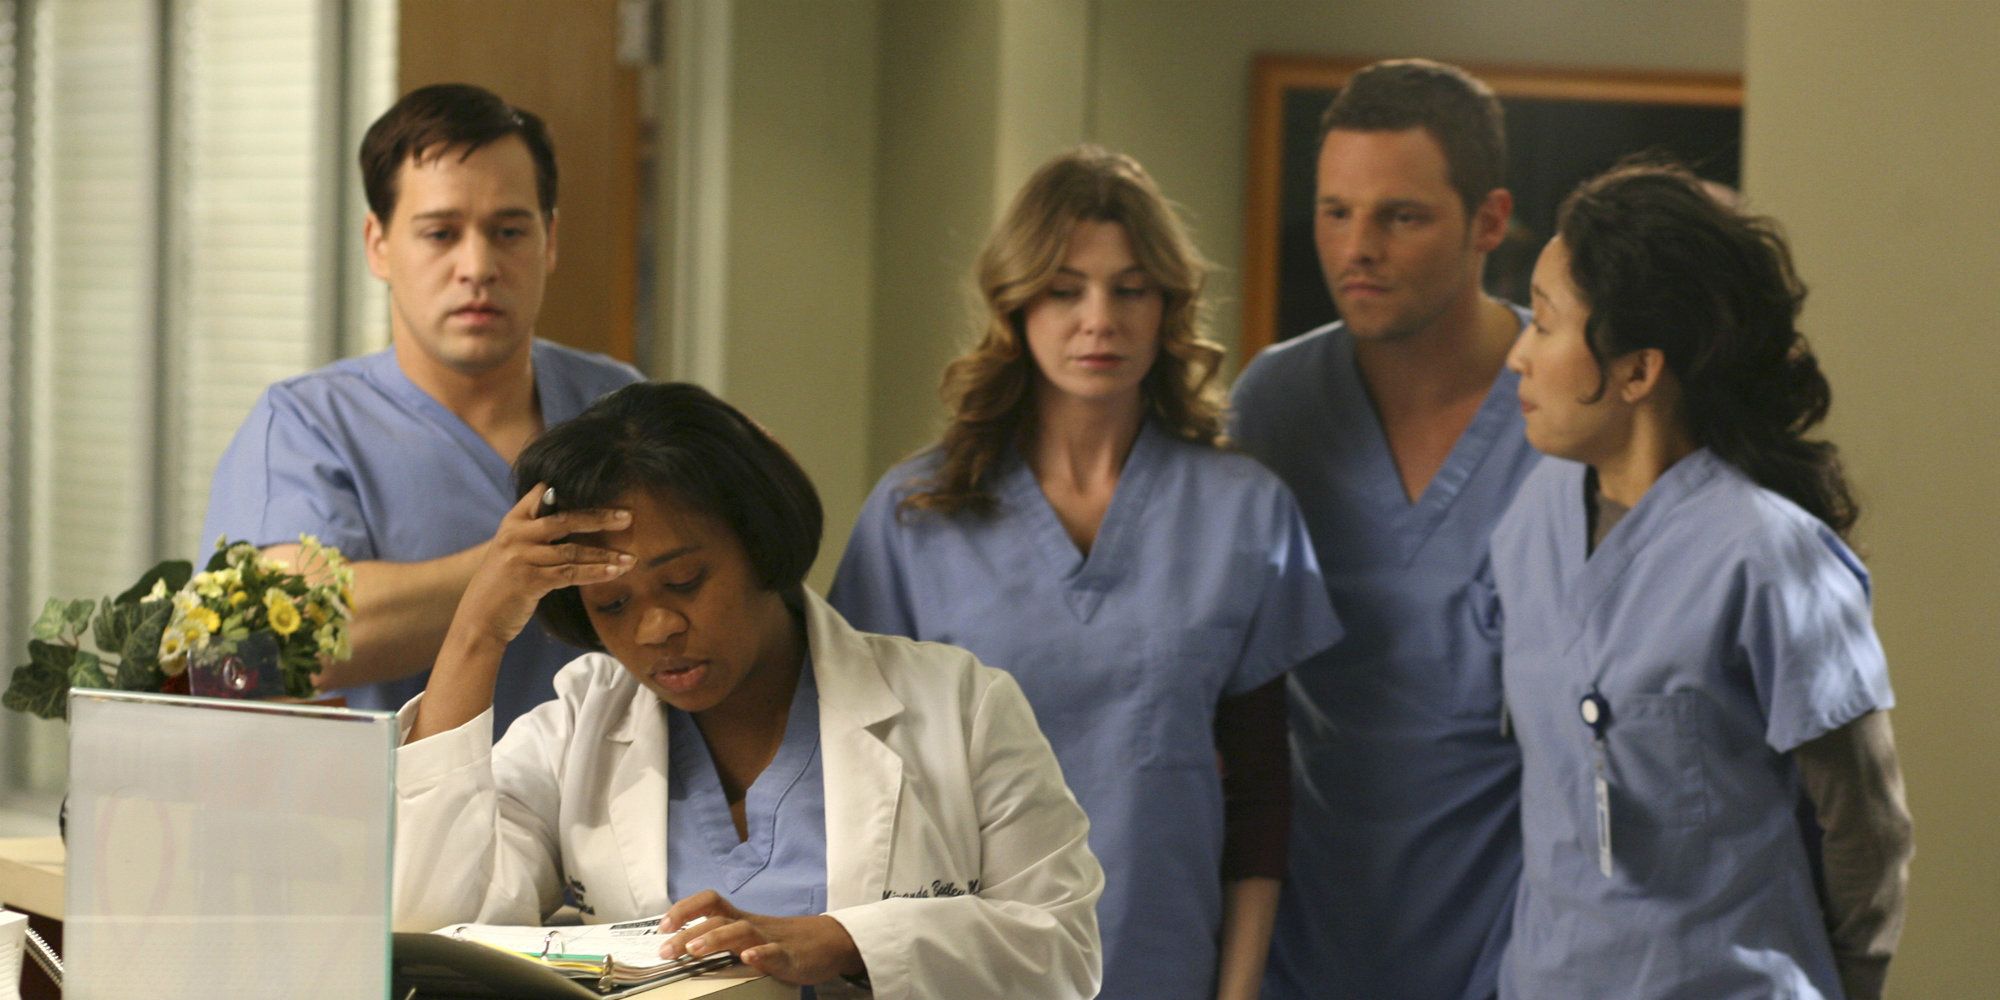 Grey’s Anatomy Why The Show Should End (& 5 Why Fans Want It To Keep Going)